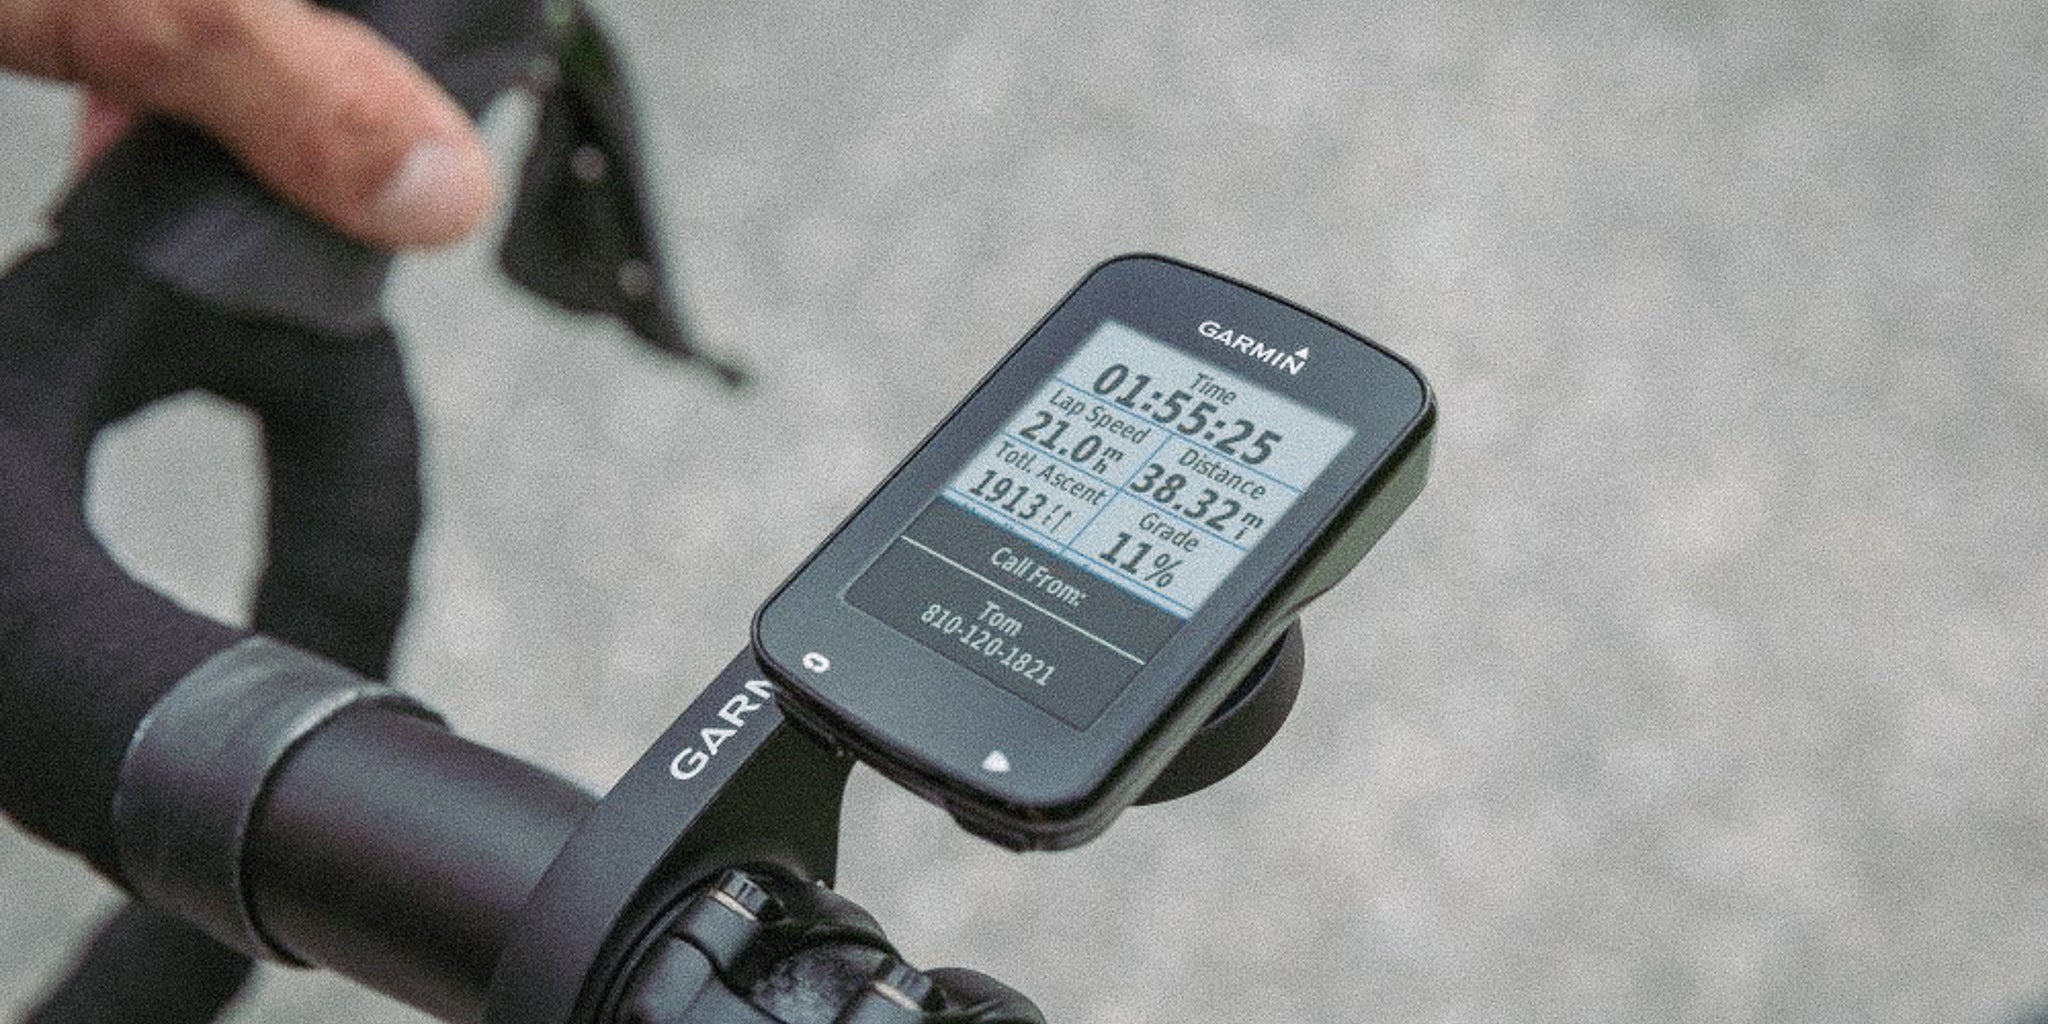 Cyclist’s hand on the handlebar with a Garmin bike computer displaying time, speed, distance, and grade data during a ride @ Bici.